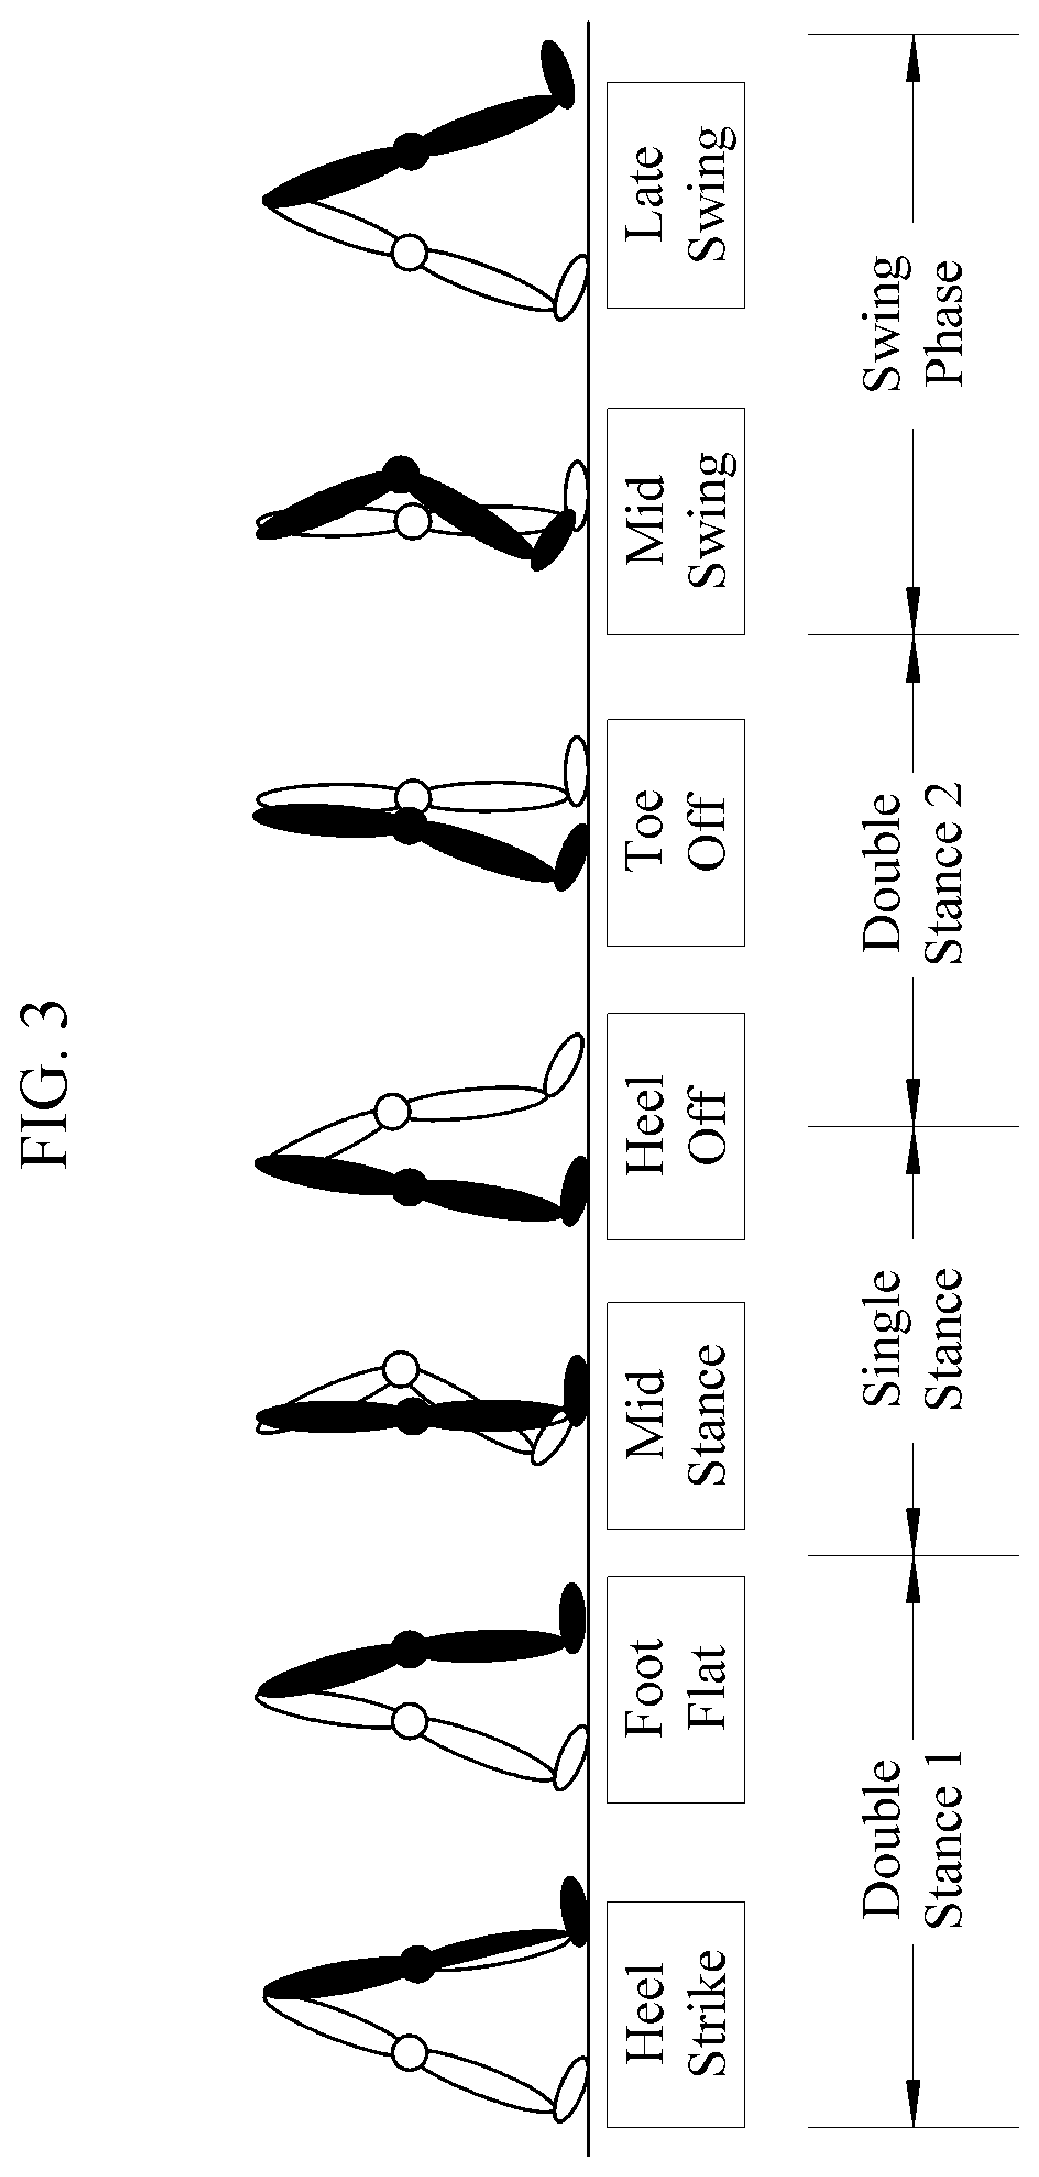 Apparatus and method for gait type classification using pressure sensor of smart insole